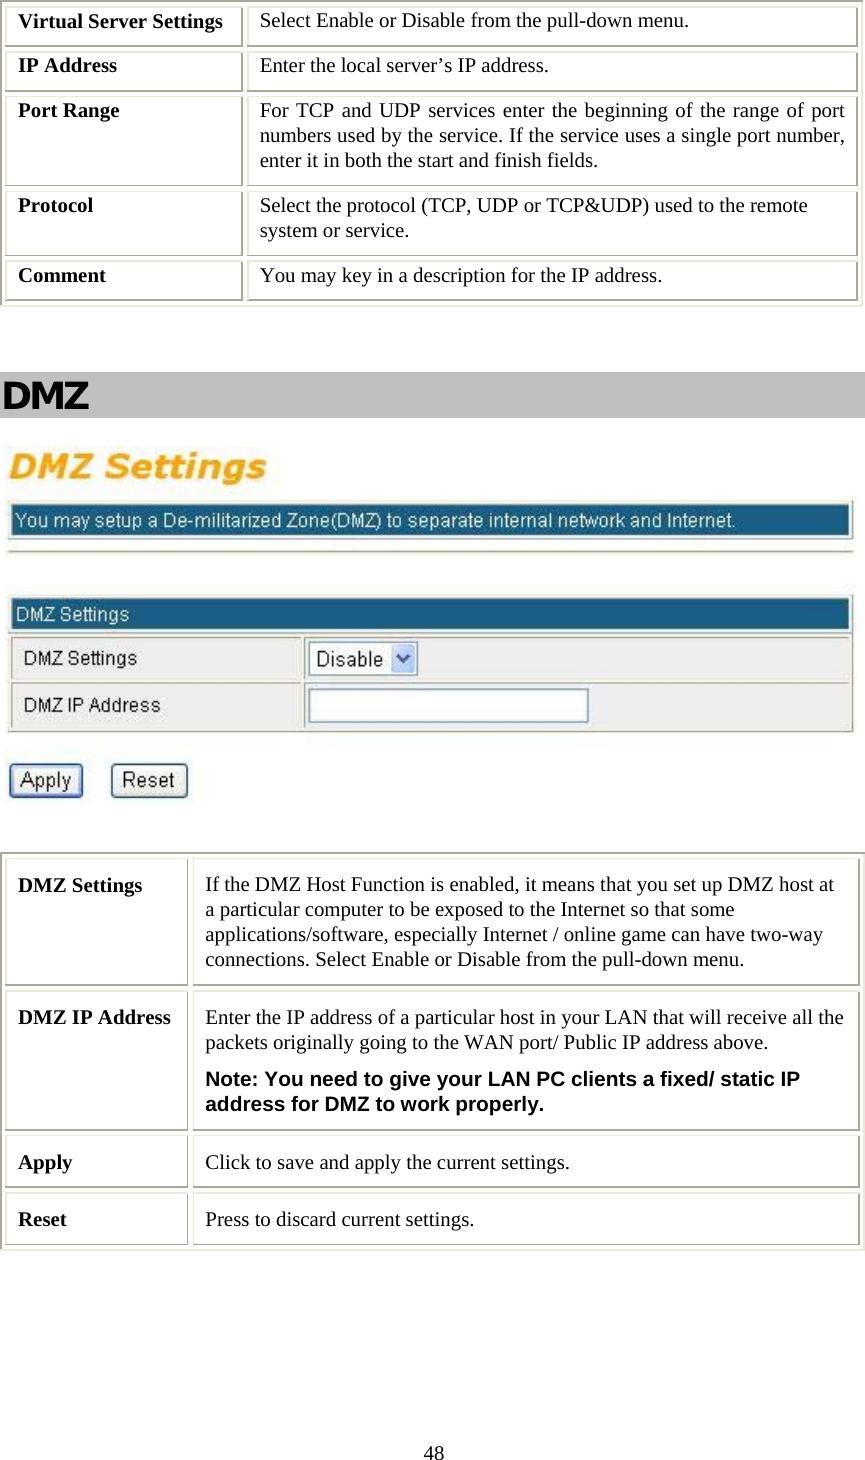   48 Virtual Server Settings  Select Enable or Disable from the pull-down menu. IP Address  Enter the local server’s IP address. Port Range  For TCP and UDP services enter the beginning of the range of port numbers used by the service. If the service uses a single port number, enter it in both the start and finish fields. Protocol  Select the protocol (TCP, UDP or TCP&amp;UDP) used to the remote system or service. Comment  You may key in a description for the IP address.  DMZ   DMZ Settings  If the DMZ Host Function is enabled, it means that you set up DMZ host at a particular computer to be exposed to the Internet so that some applications/software, especially Internet / online game can have two-way connections. Select Enable or Disable from the pull-down menu. DMZ IP Address  Enter the IP address of a particular host in your LAN that will receive all the packets originally going to the WAN port/ Public IP address above. Note: You need to give your LAN PC clients a fixed/ static IP address for DMZ to work properly. Apply  Click to save and apply the current settings. Reset  Press to discard current settings.  